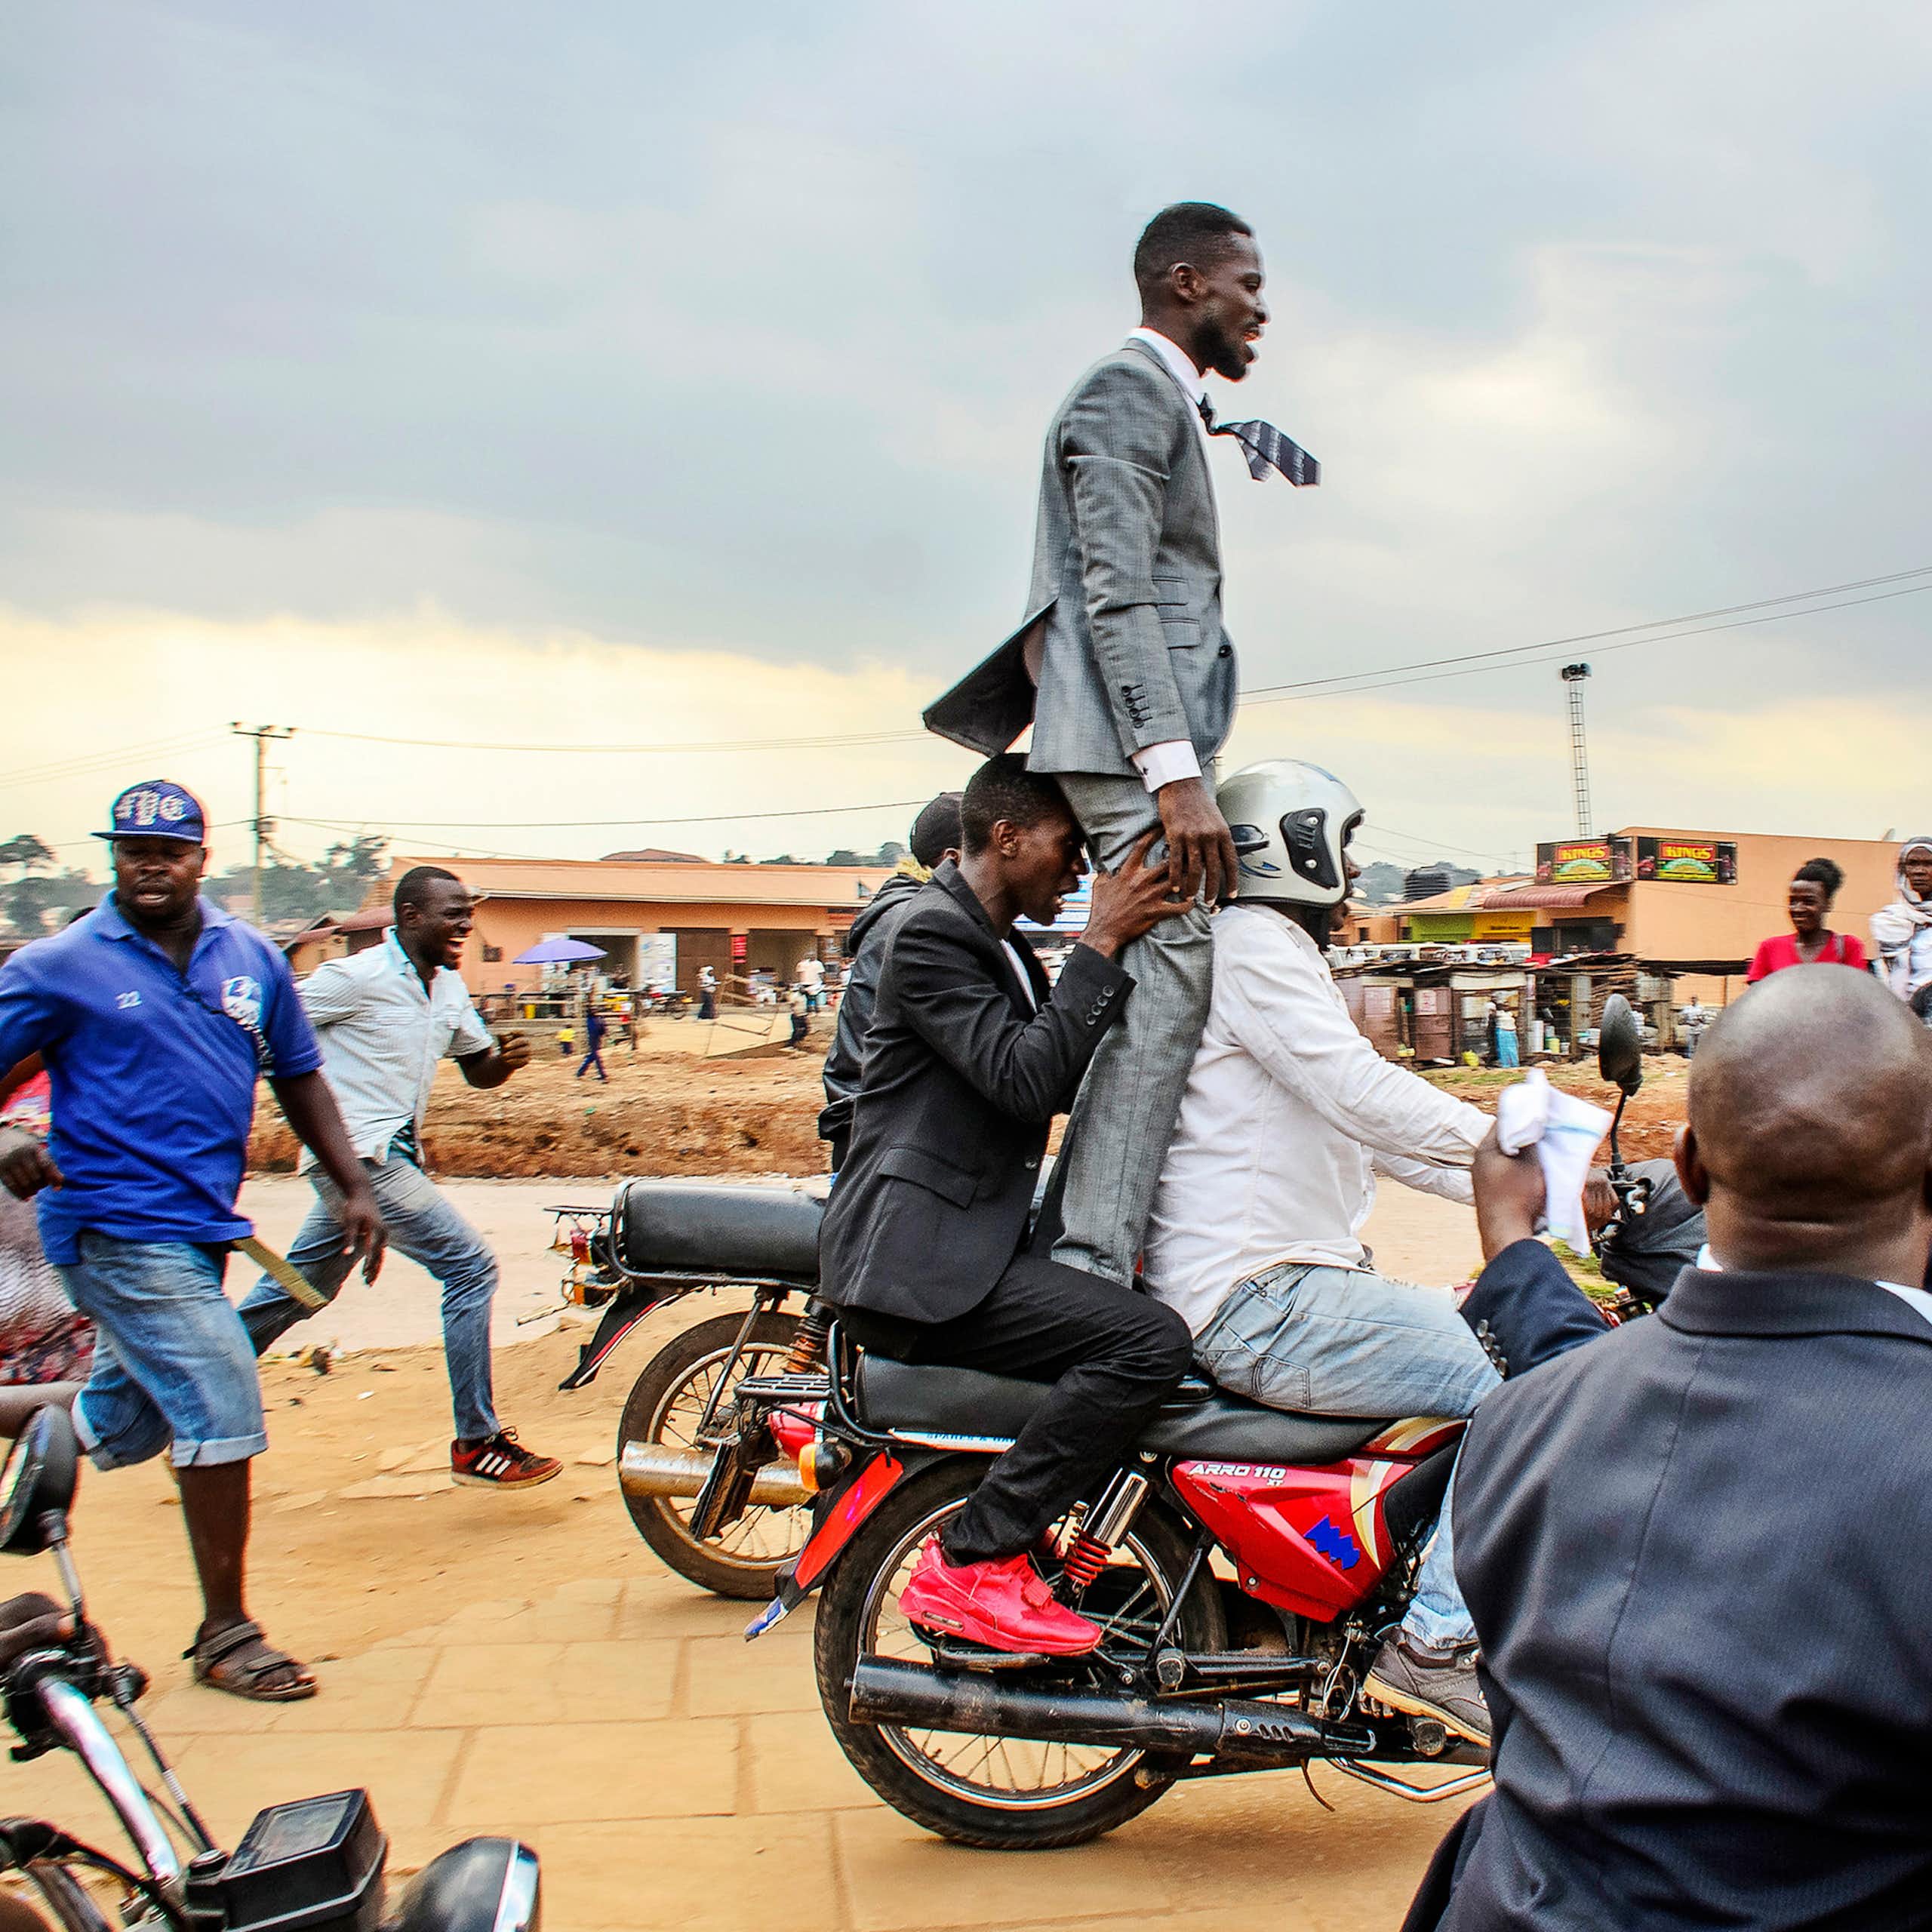 A man in a suit stands on the back of as moving motorbike, held from behind by another man as they drive along a dirt road in Uganda, some people running alongside or watching on.